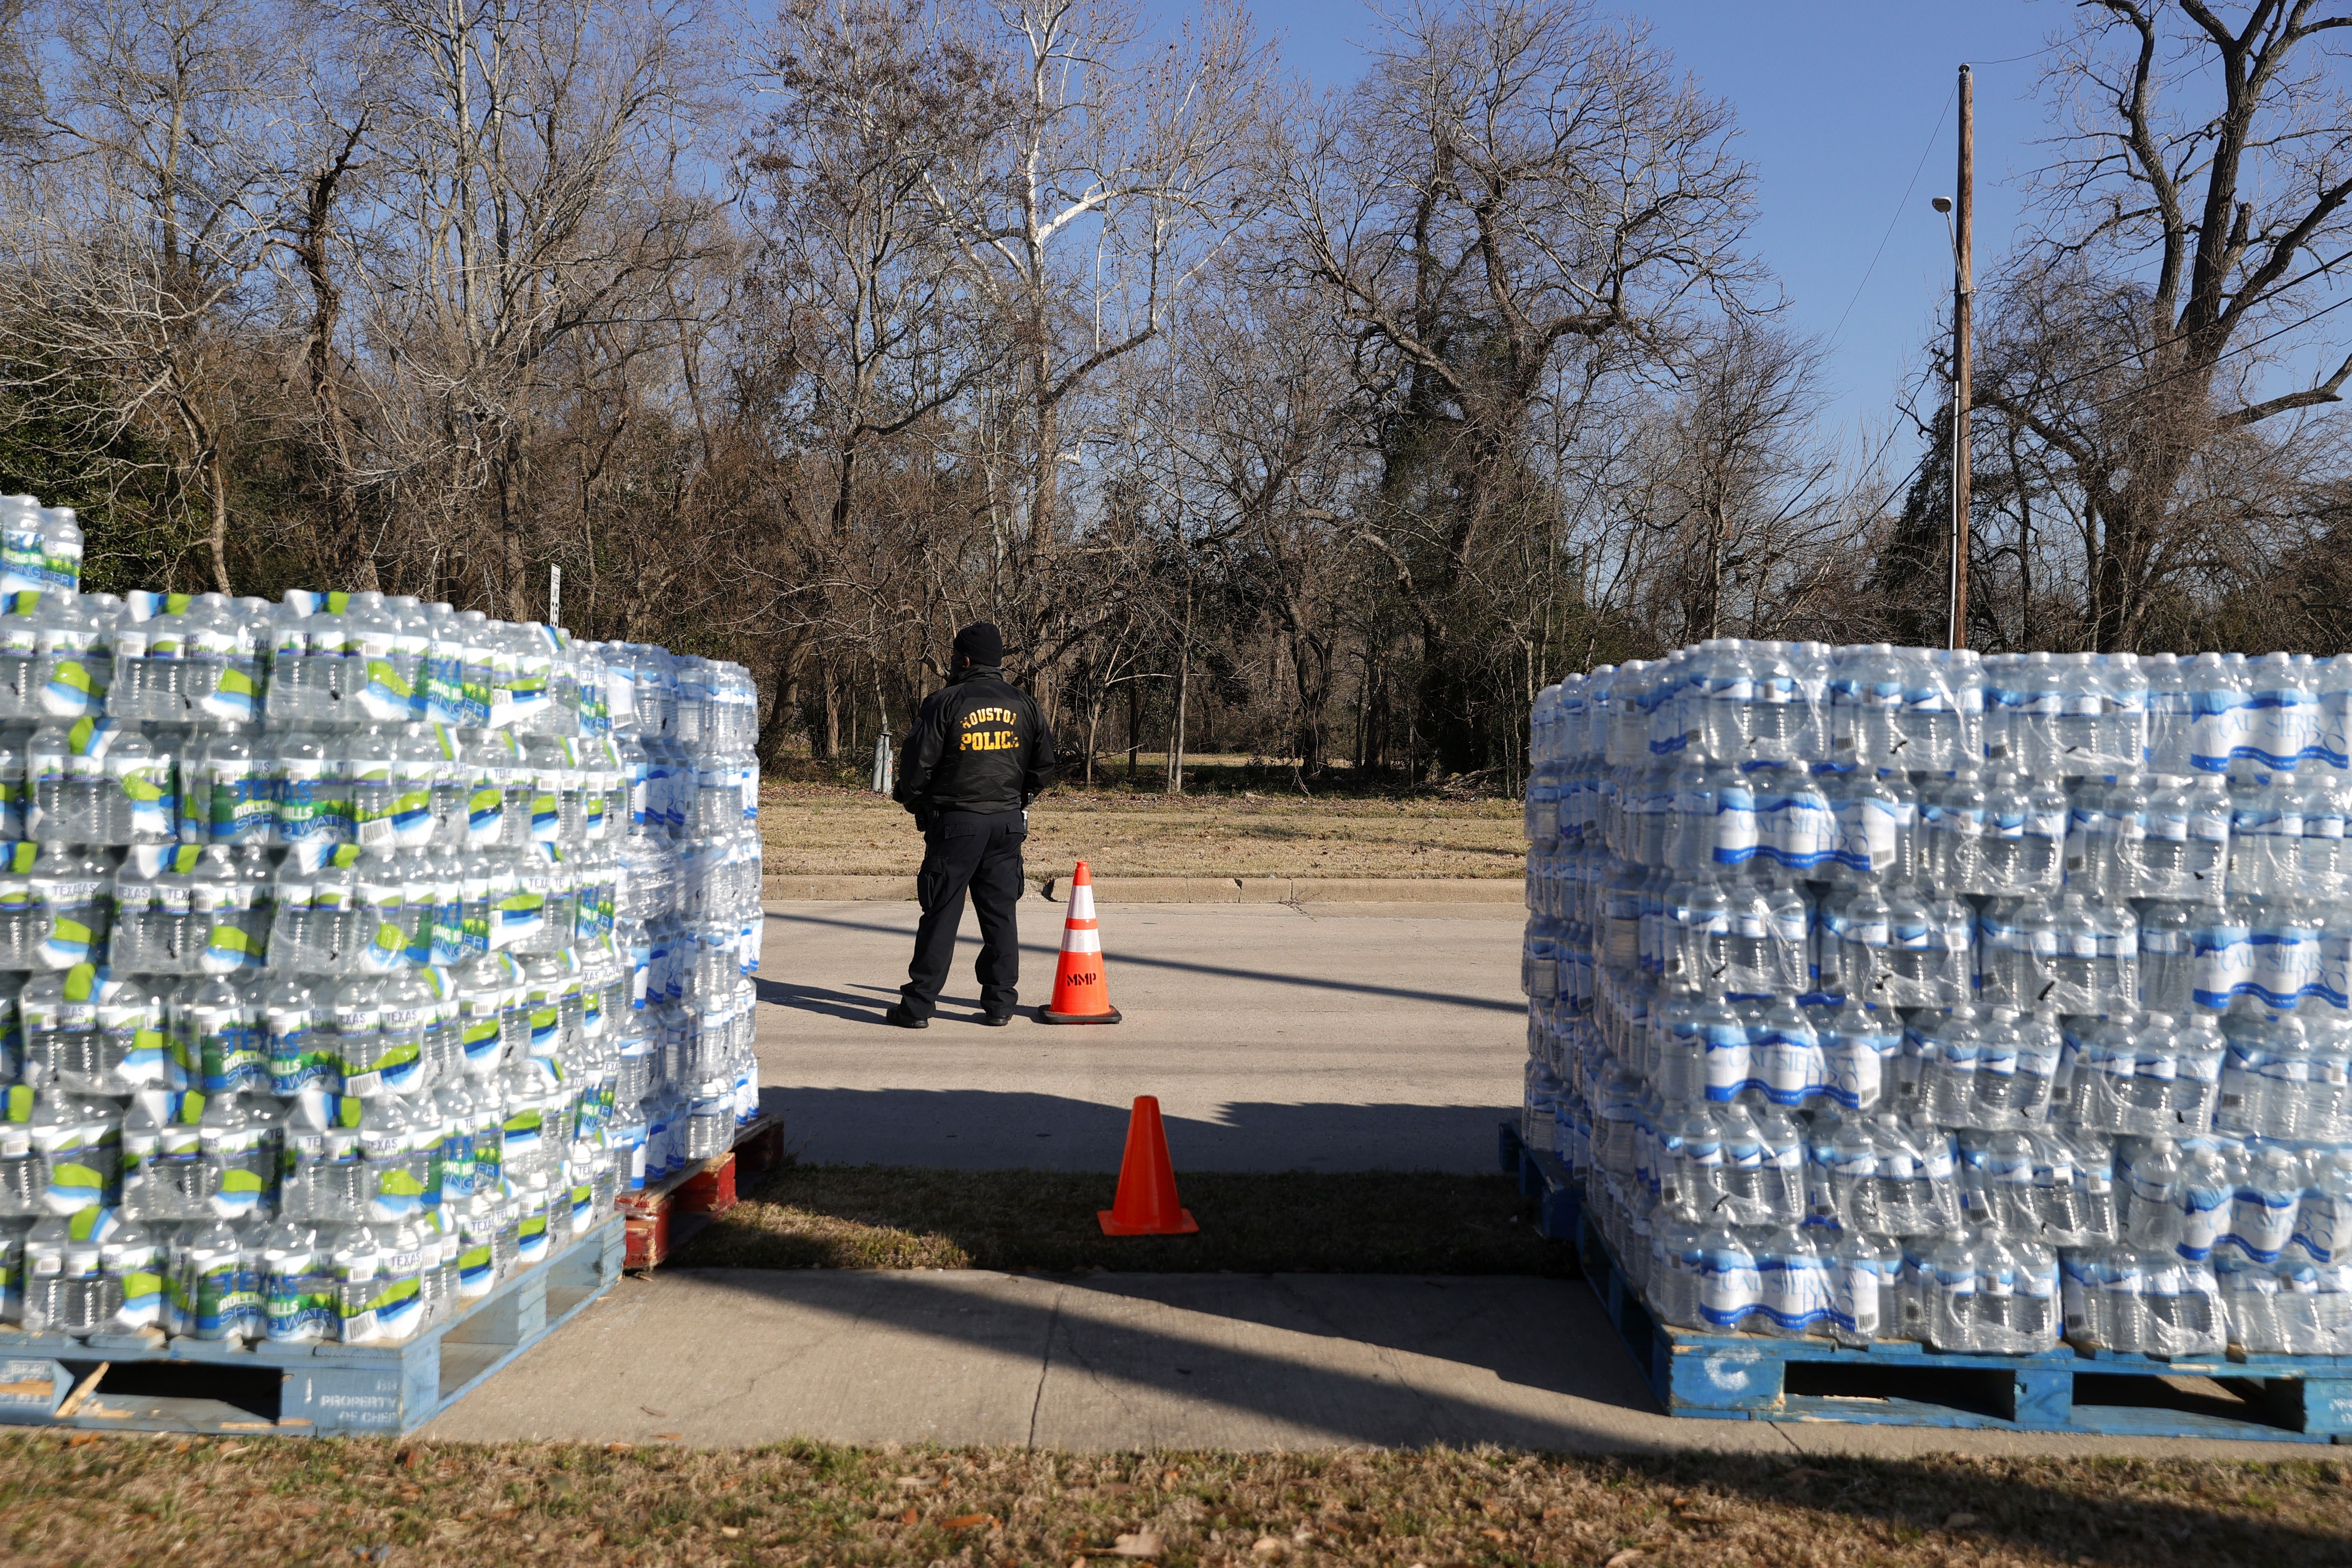 A person wearing a dark hoodie stands between two tall stacks of bottled water on pallets